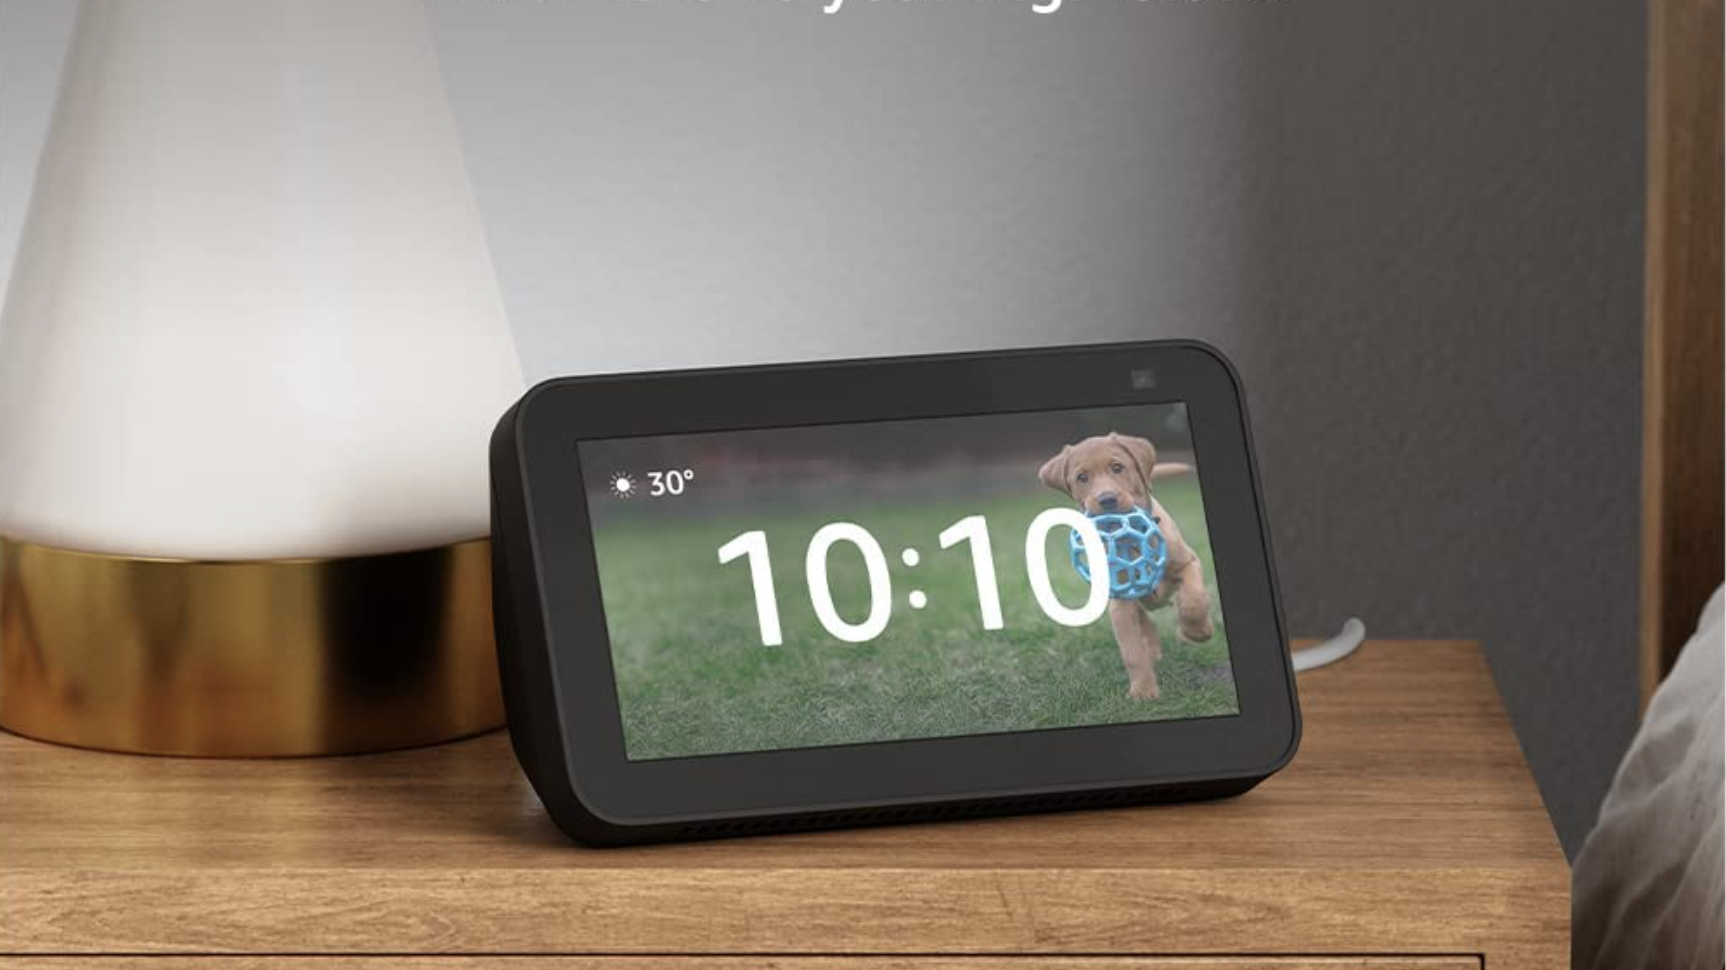 the echo show 5 on a nightstand